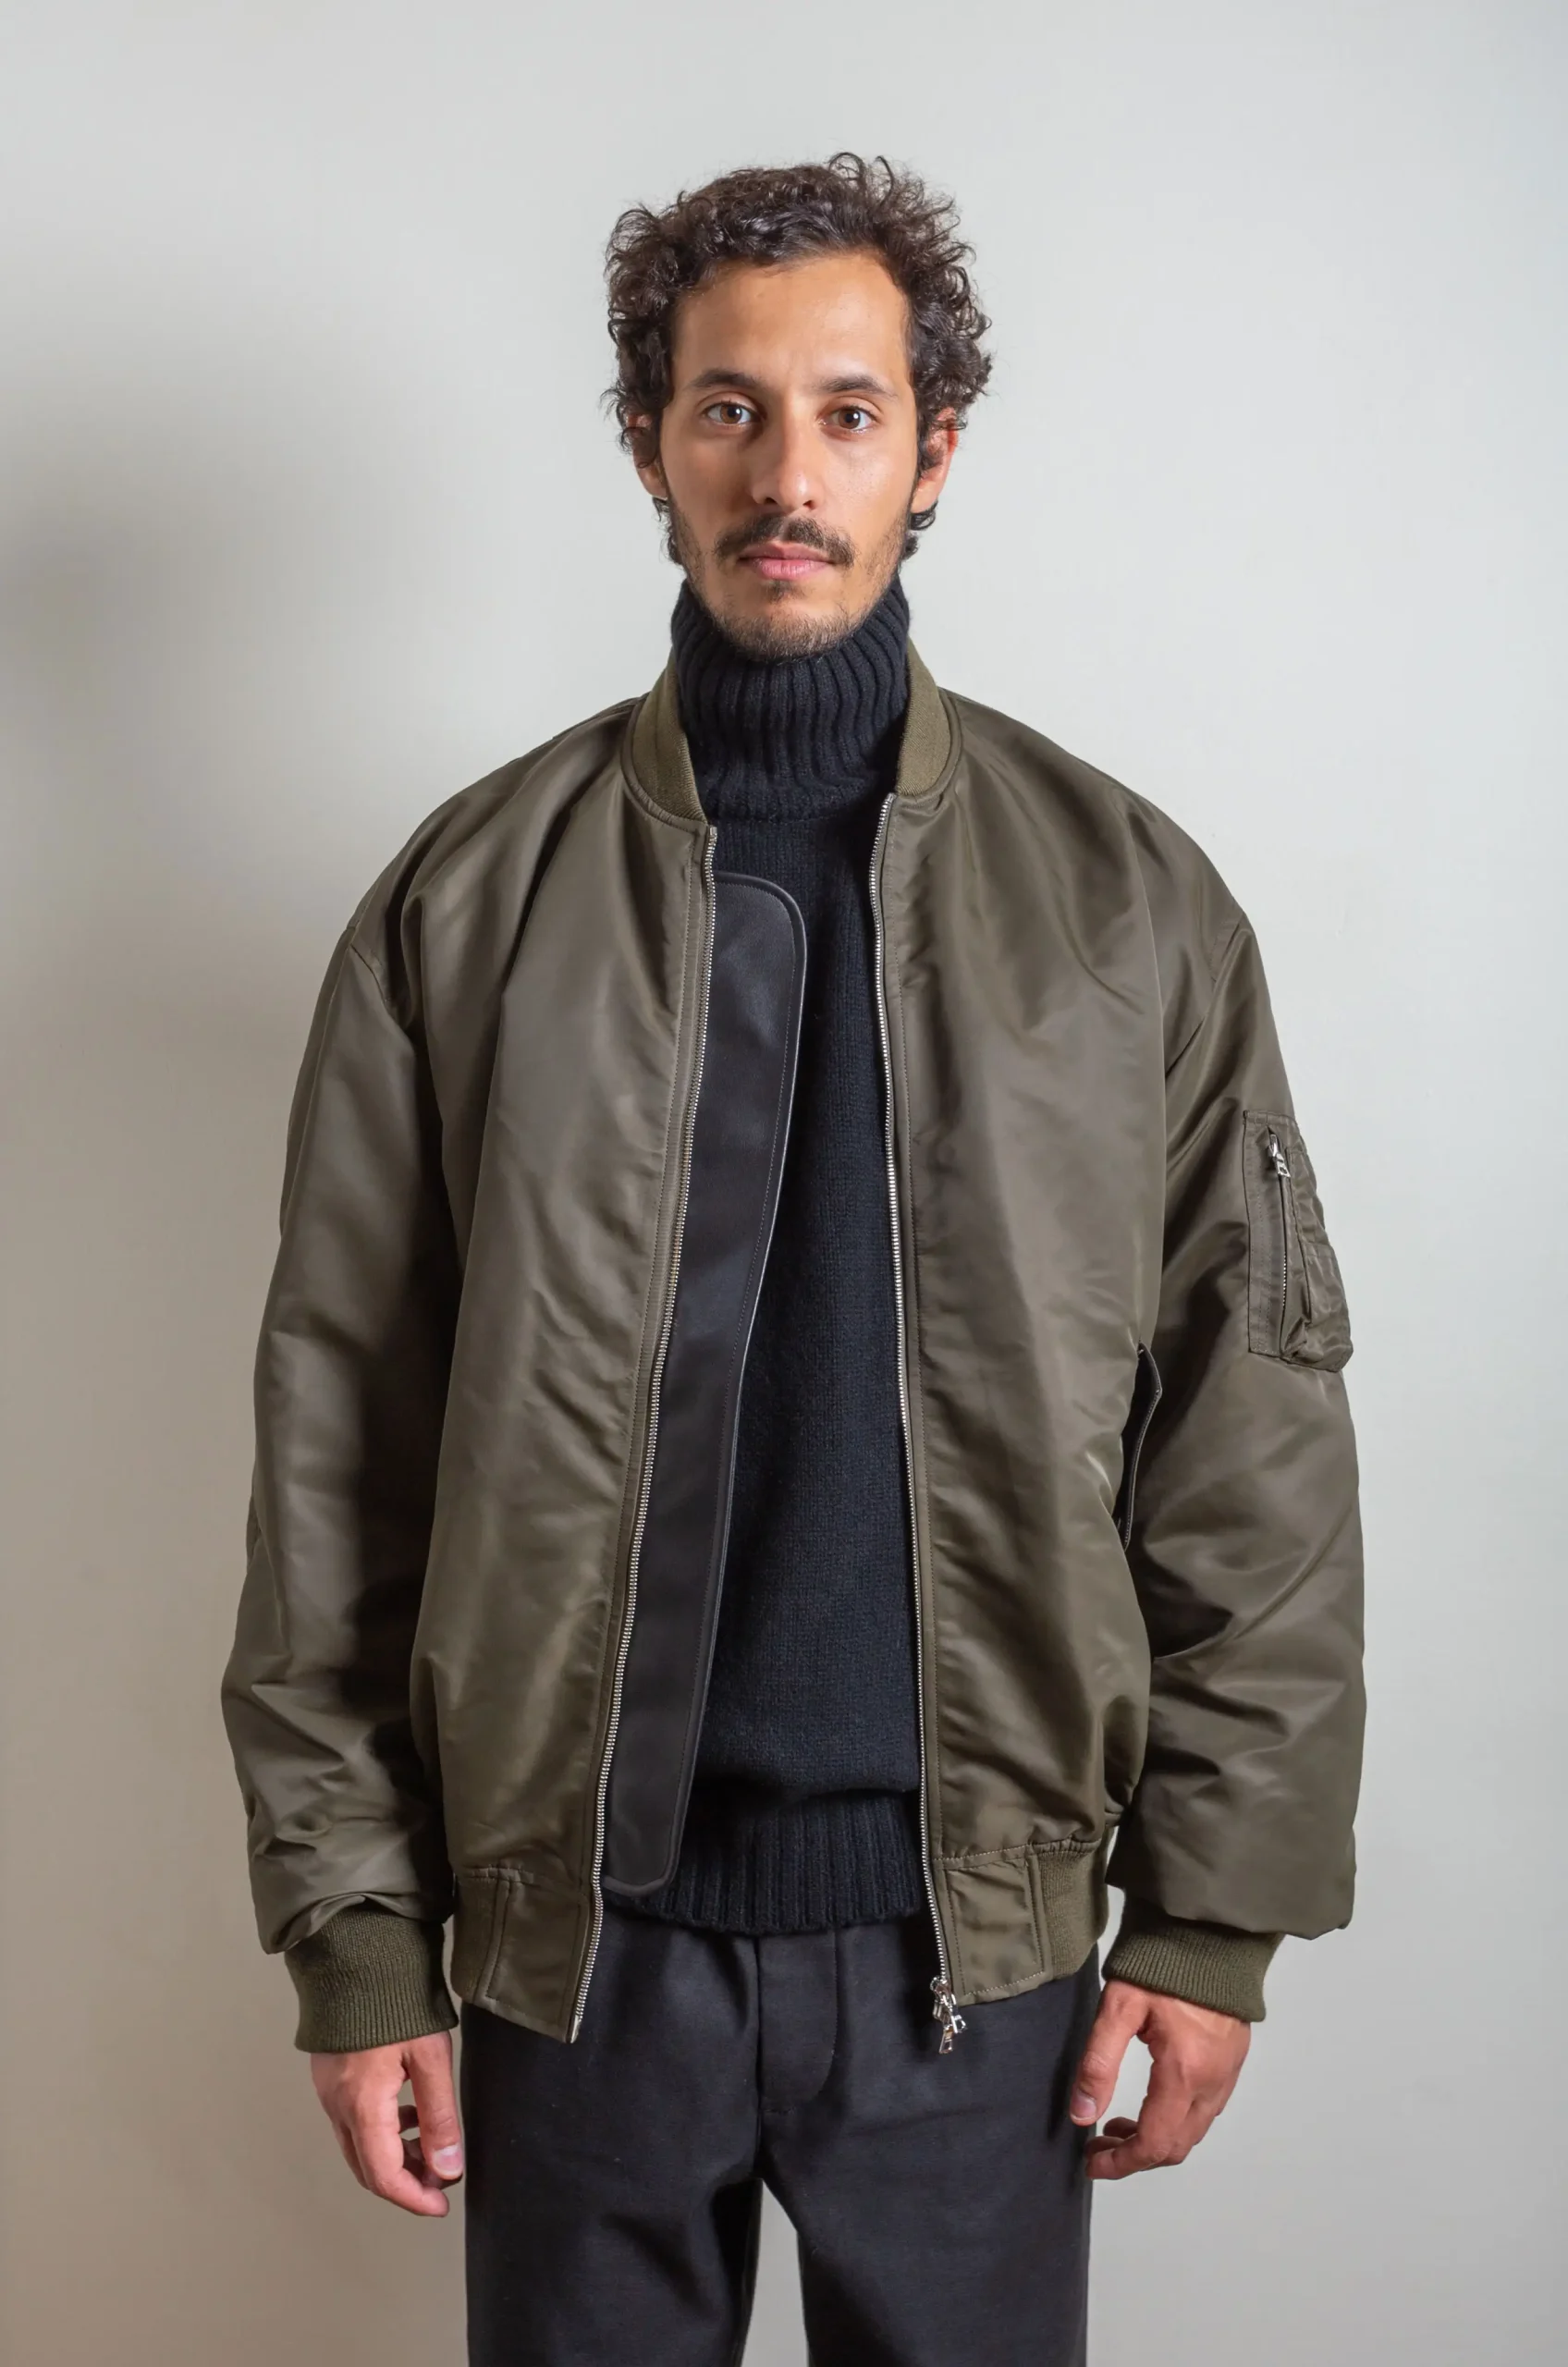 Jackets & Coats - Discover our Selection